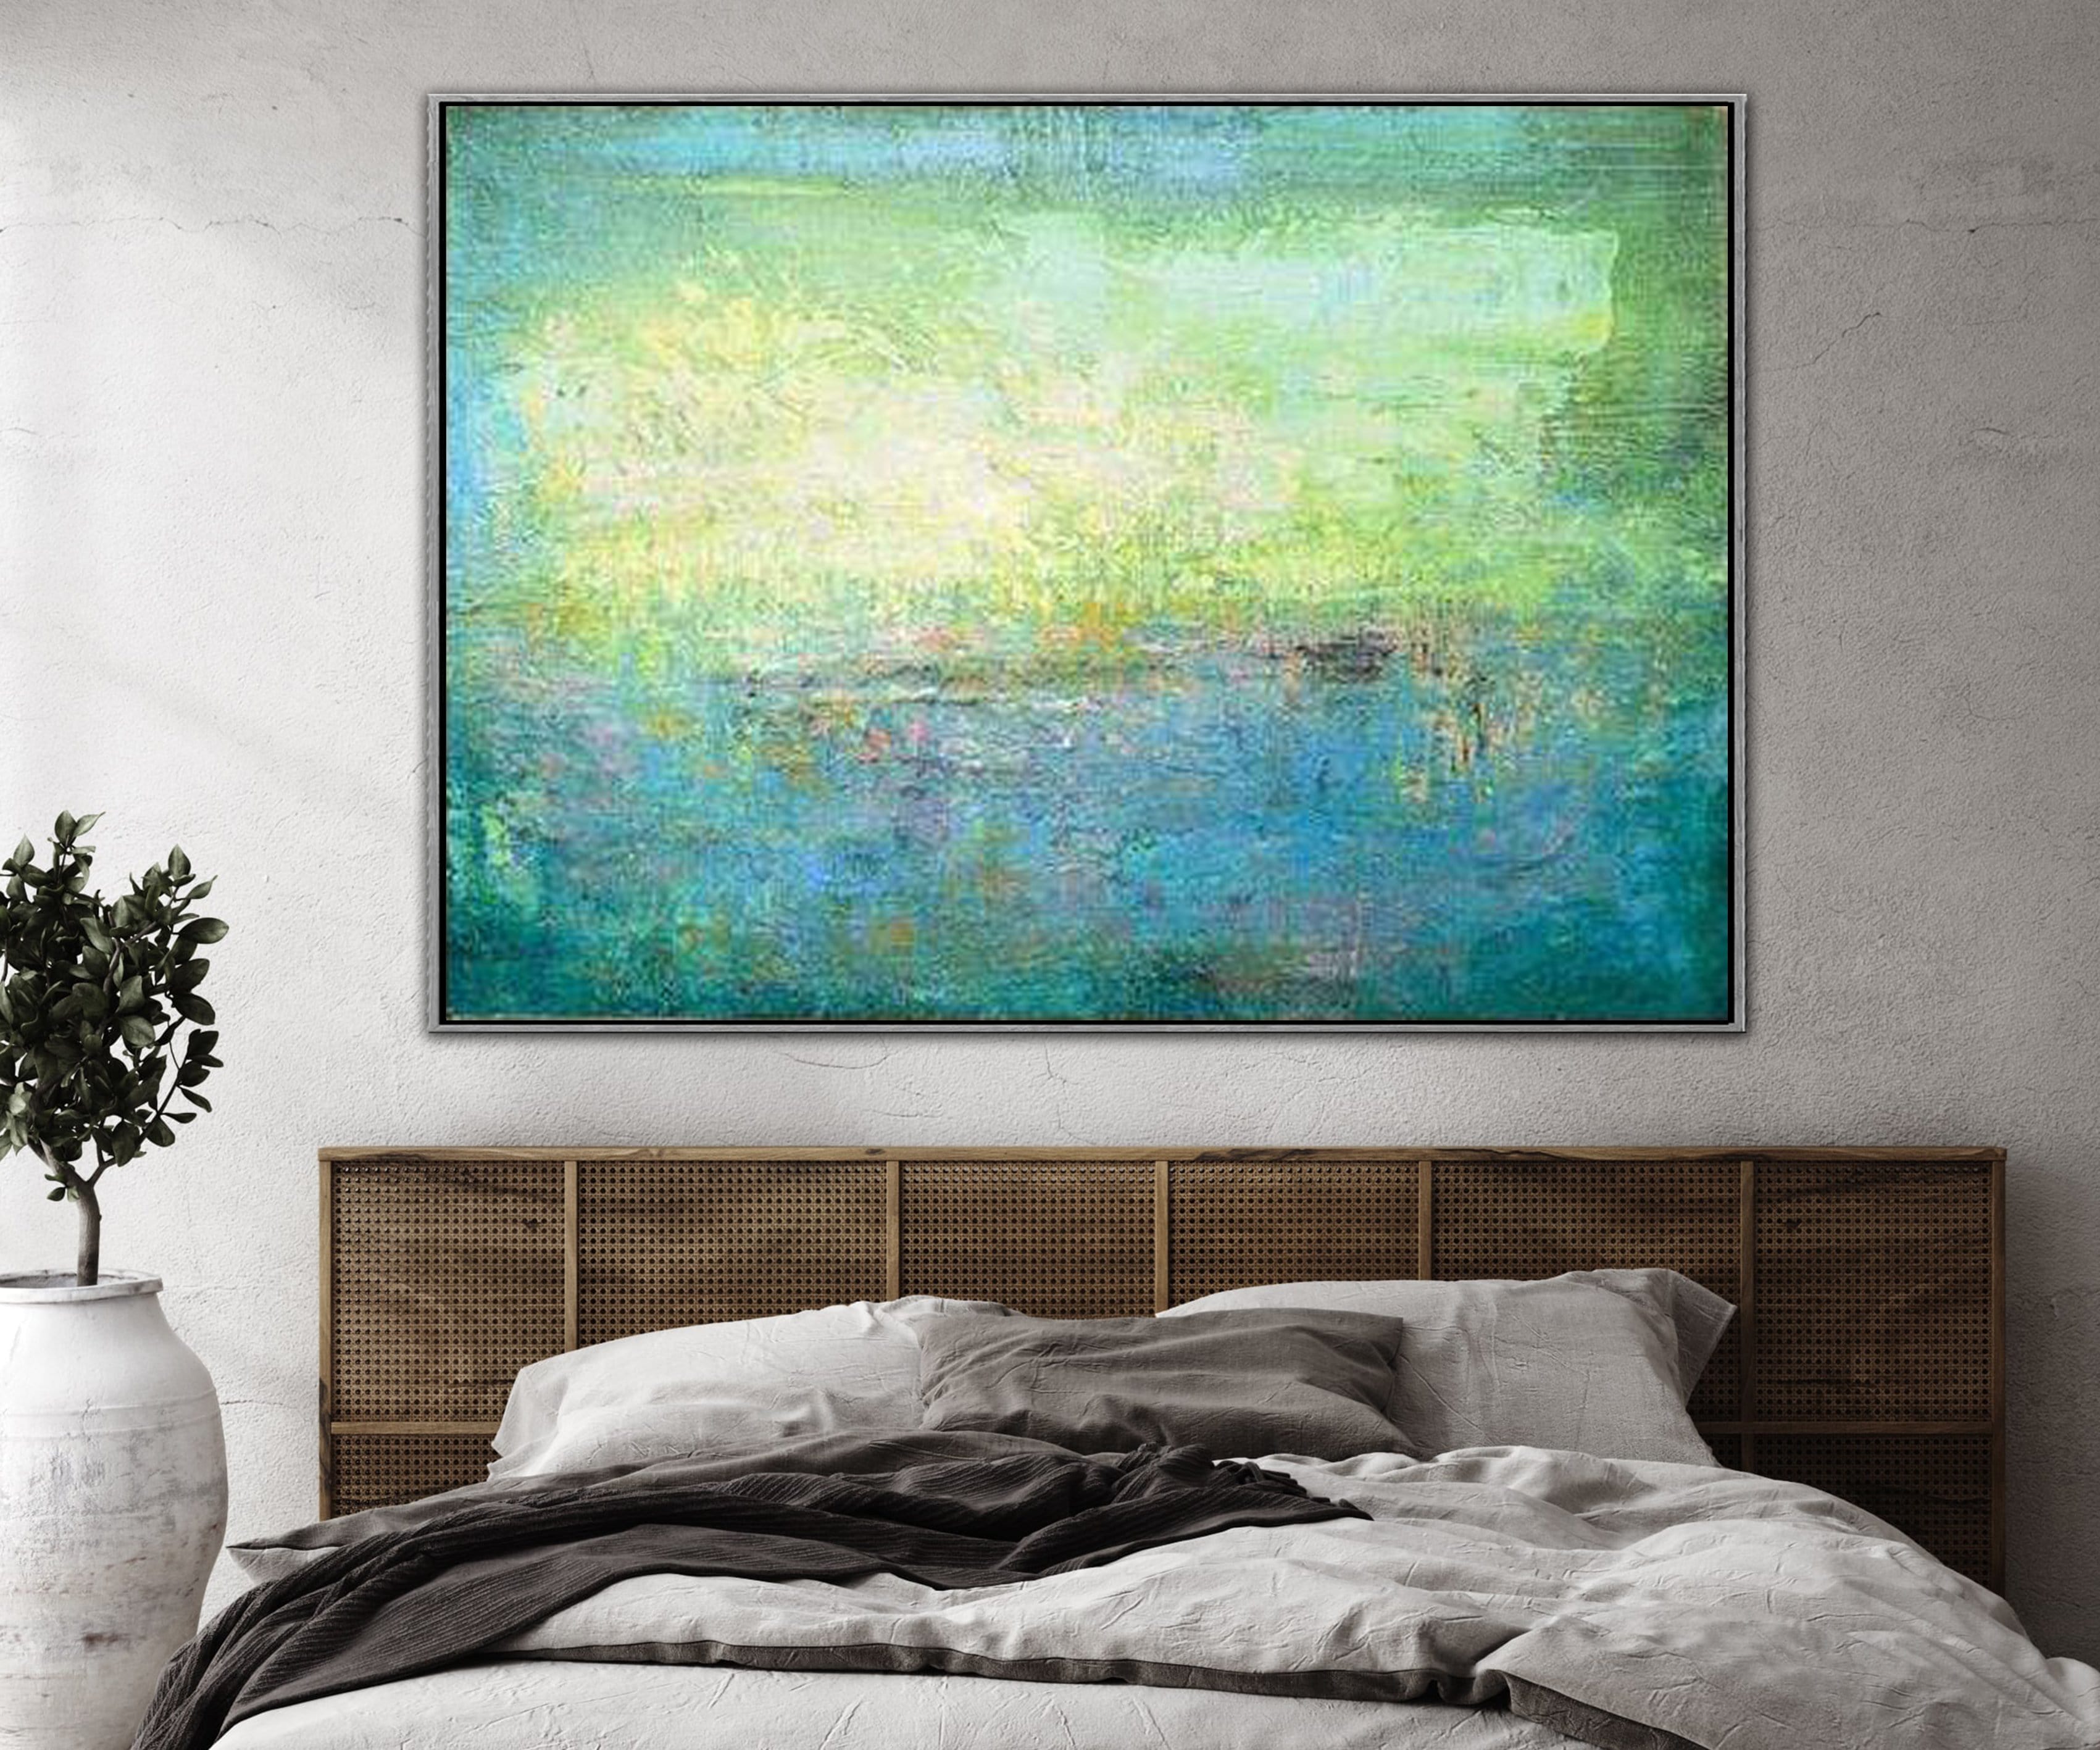 TURQUOISE MEADOW FROM $340